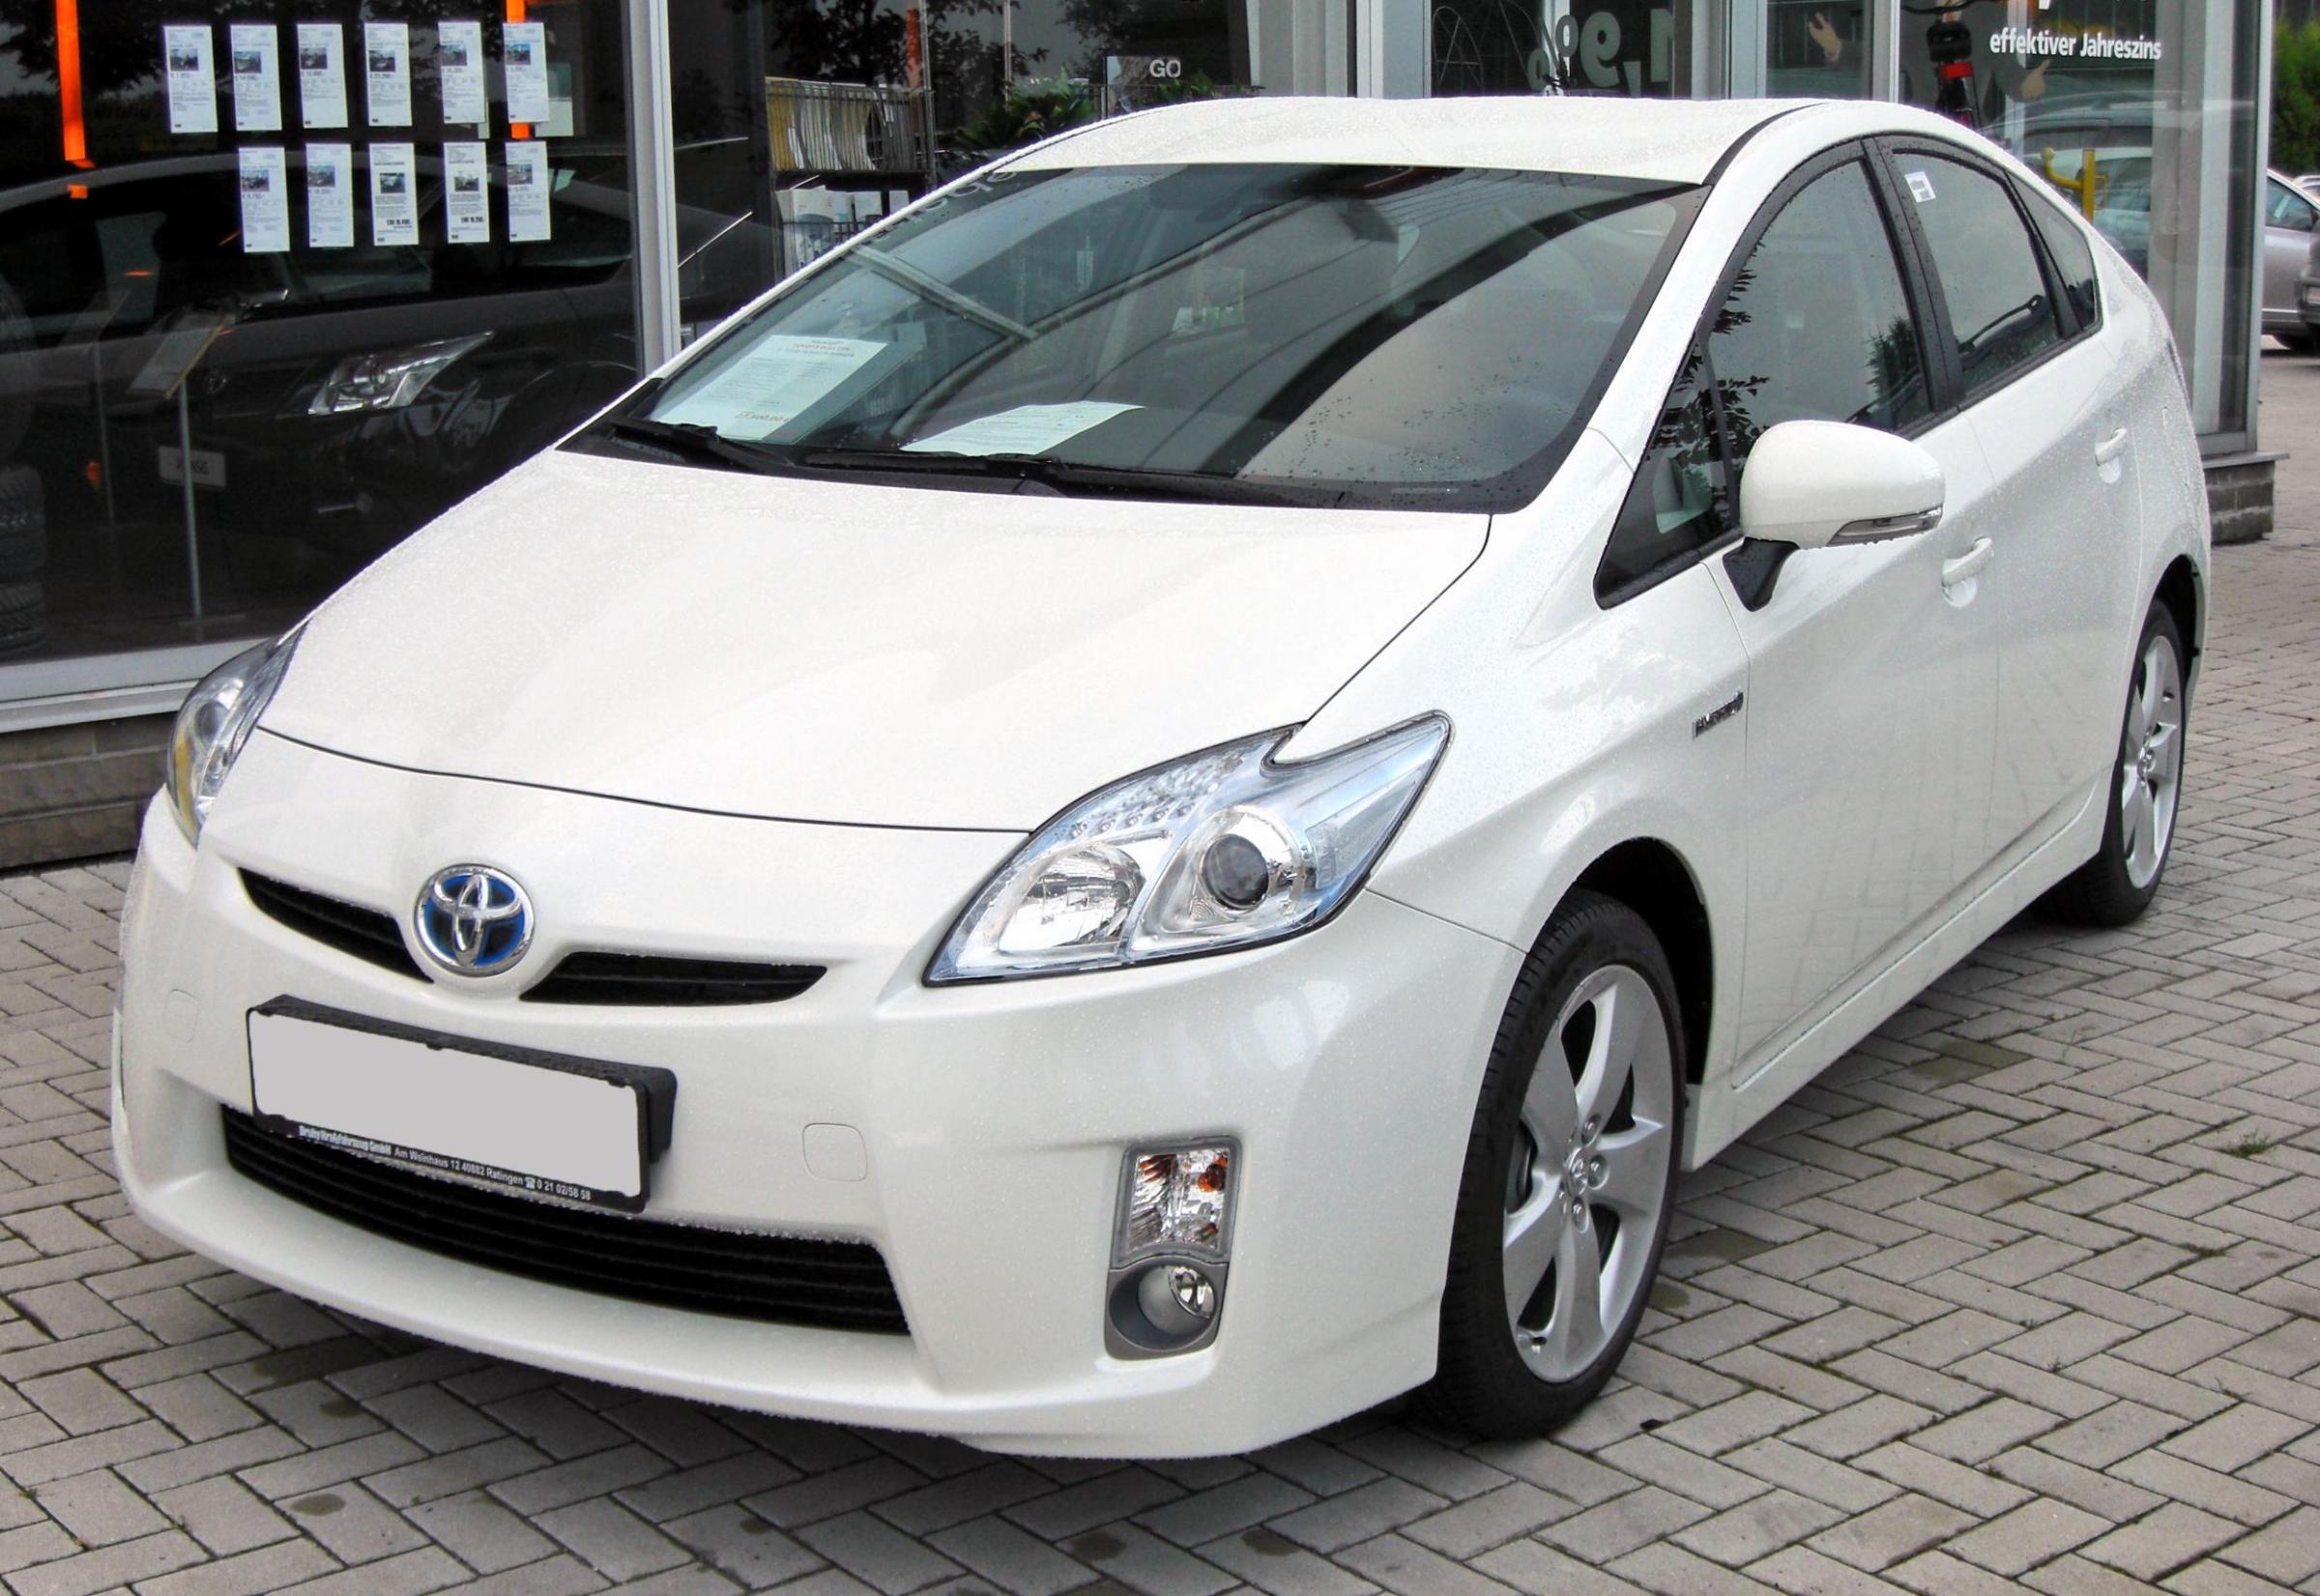 is the toyota prius really environmentally friendly #4